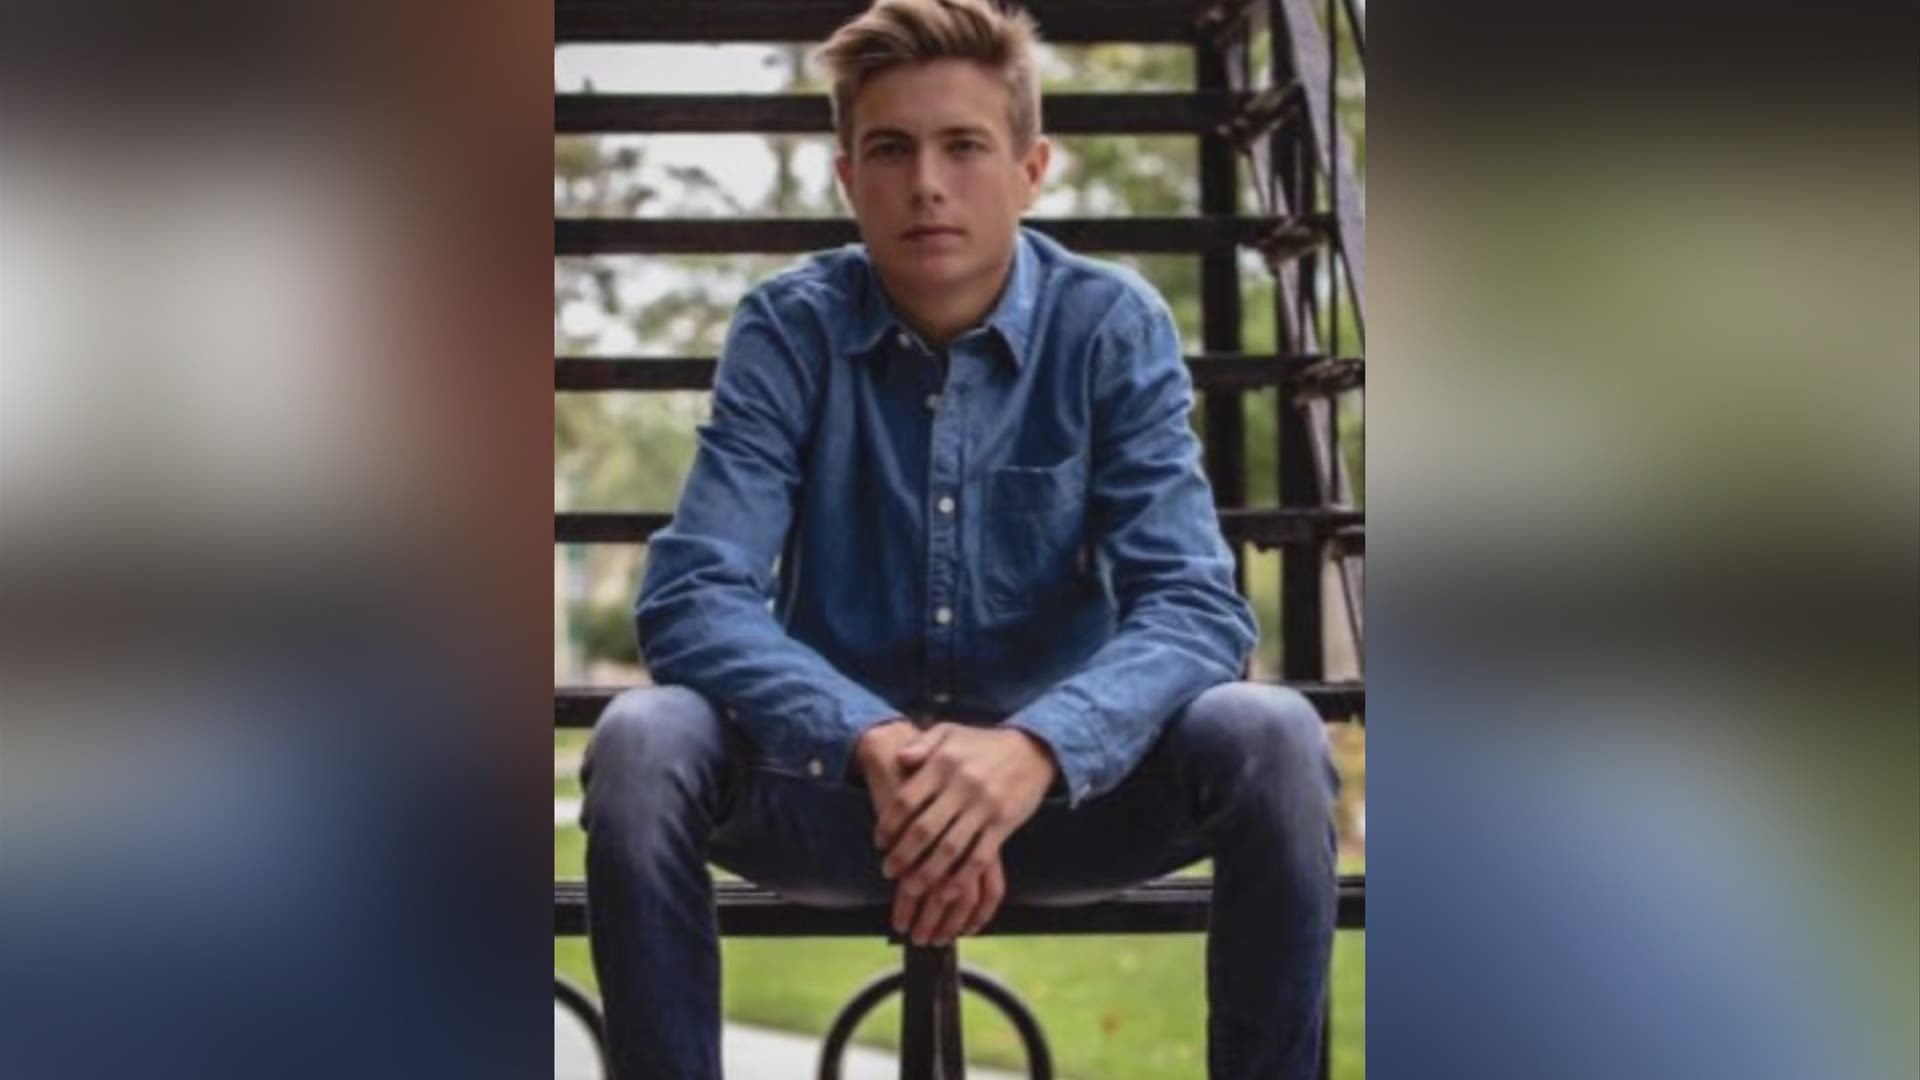 The family of Stone Foltz has filed a wrongful death lawsuit against the fraternity and some of its members over the teen's death in an alleged hazing ritual.